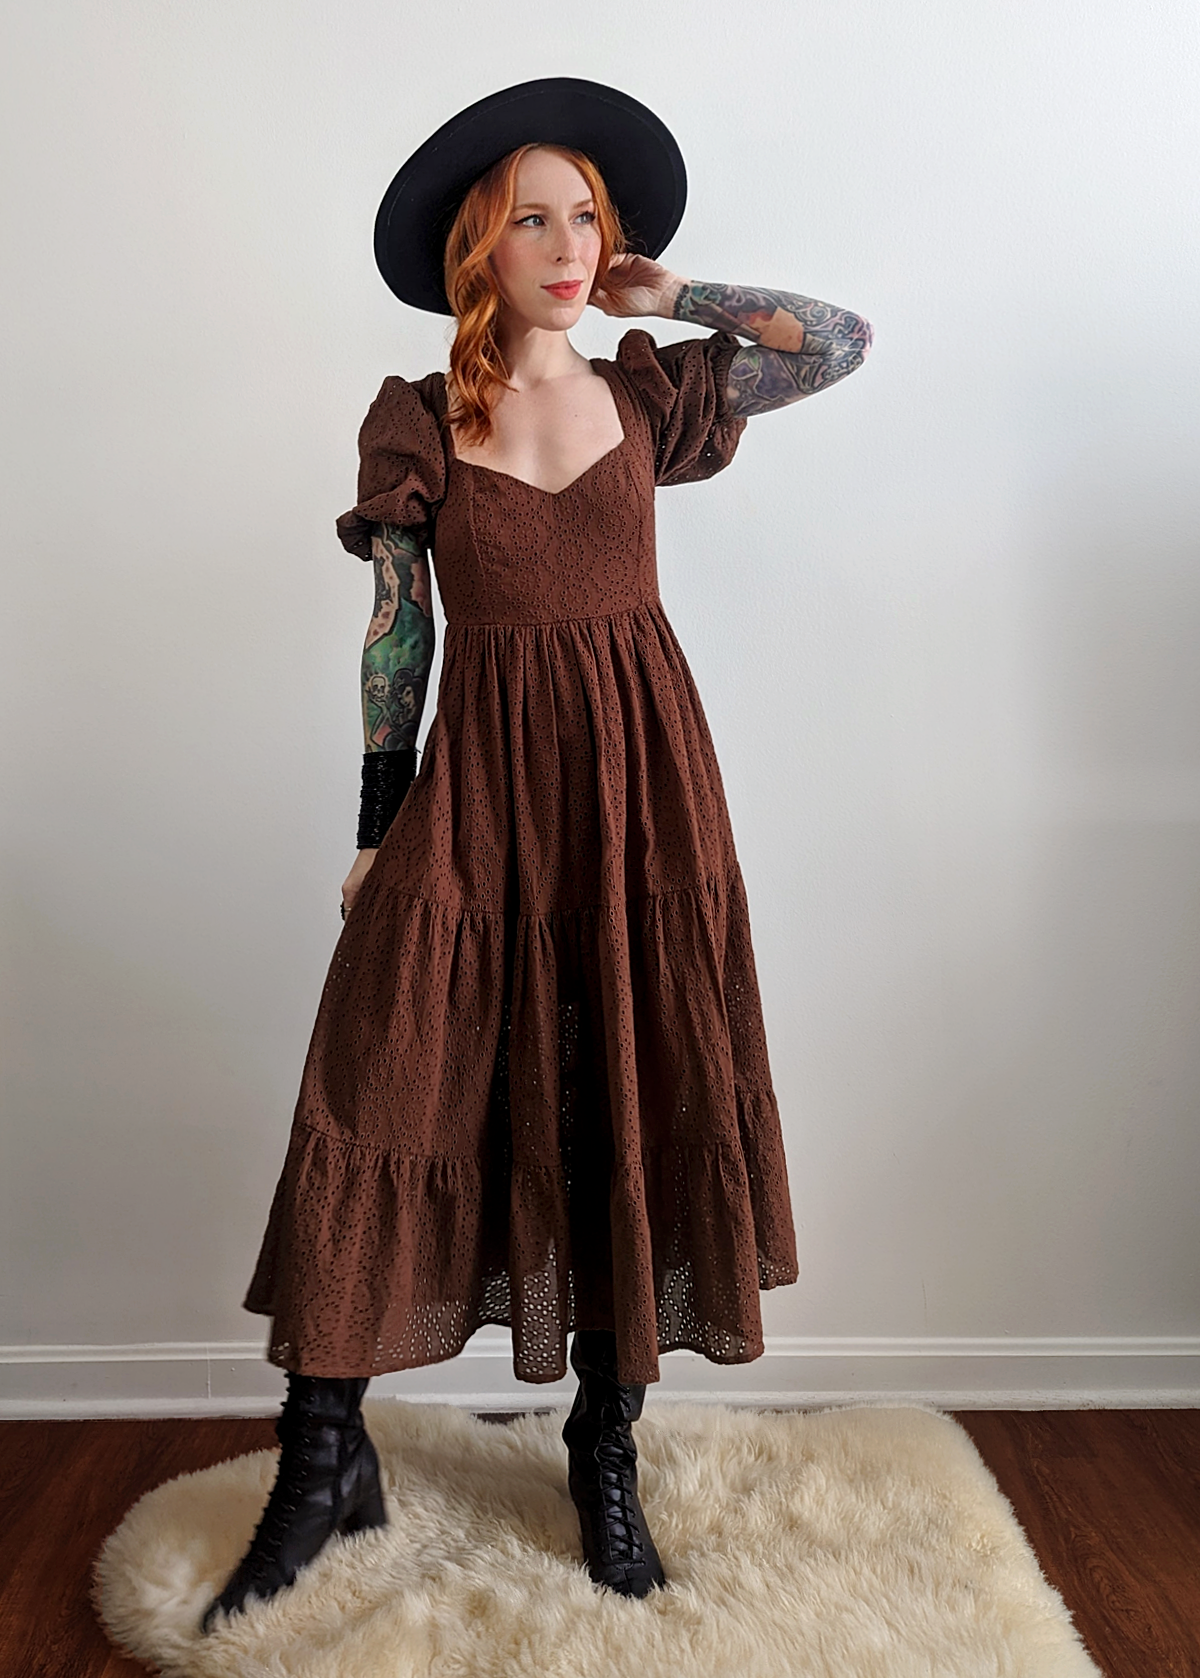 70s inspired prairie dress made of 100% eyelet cotton in a walnut brown colorway. Features puff sleeves, sweetheart neckline, smocked back with tie closure, and ruffled tiered skirt. 